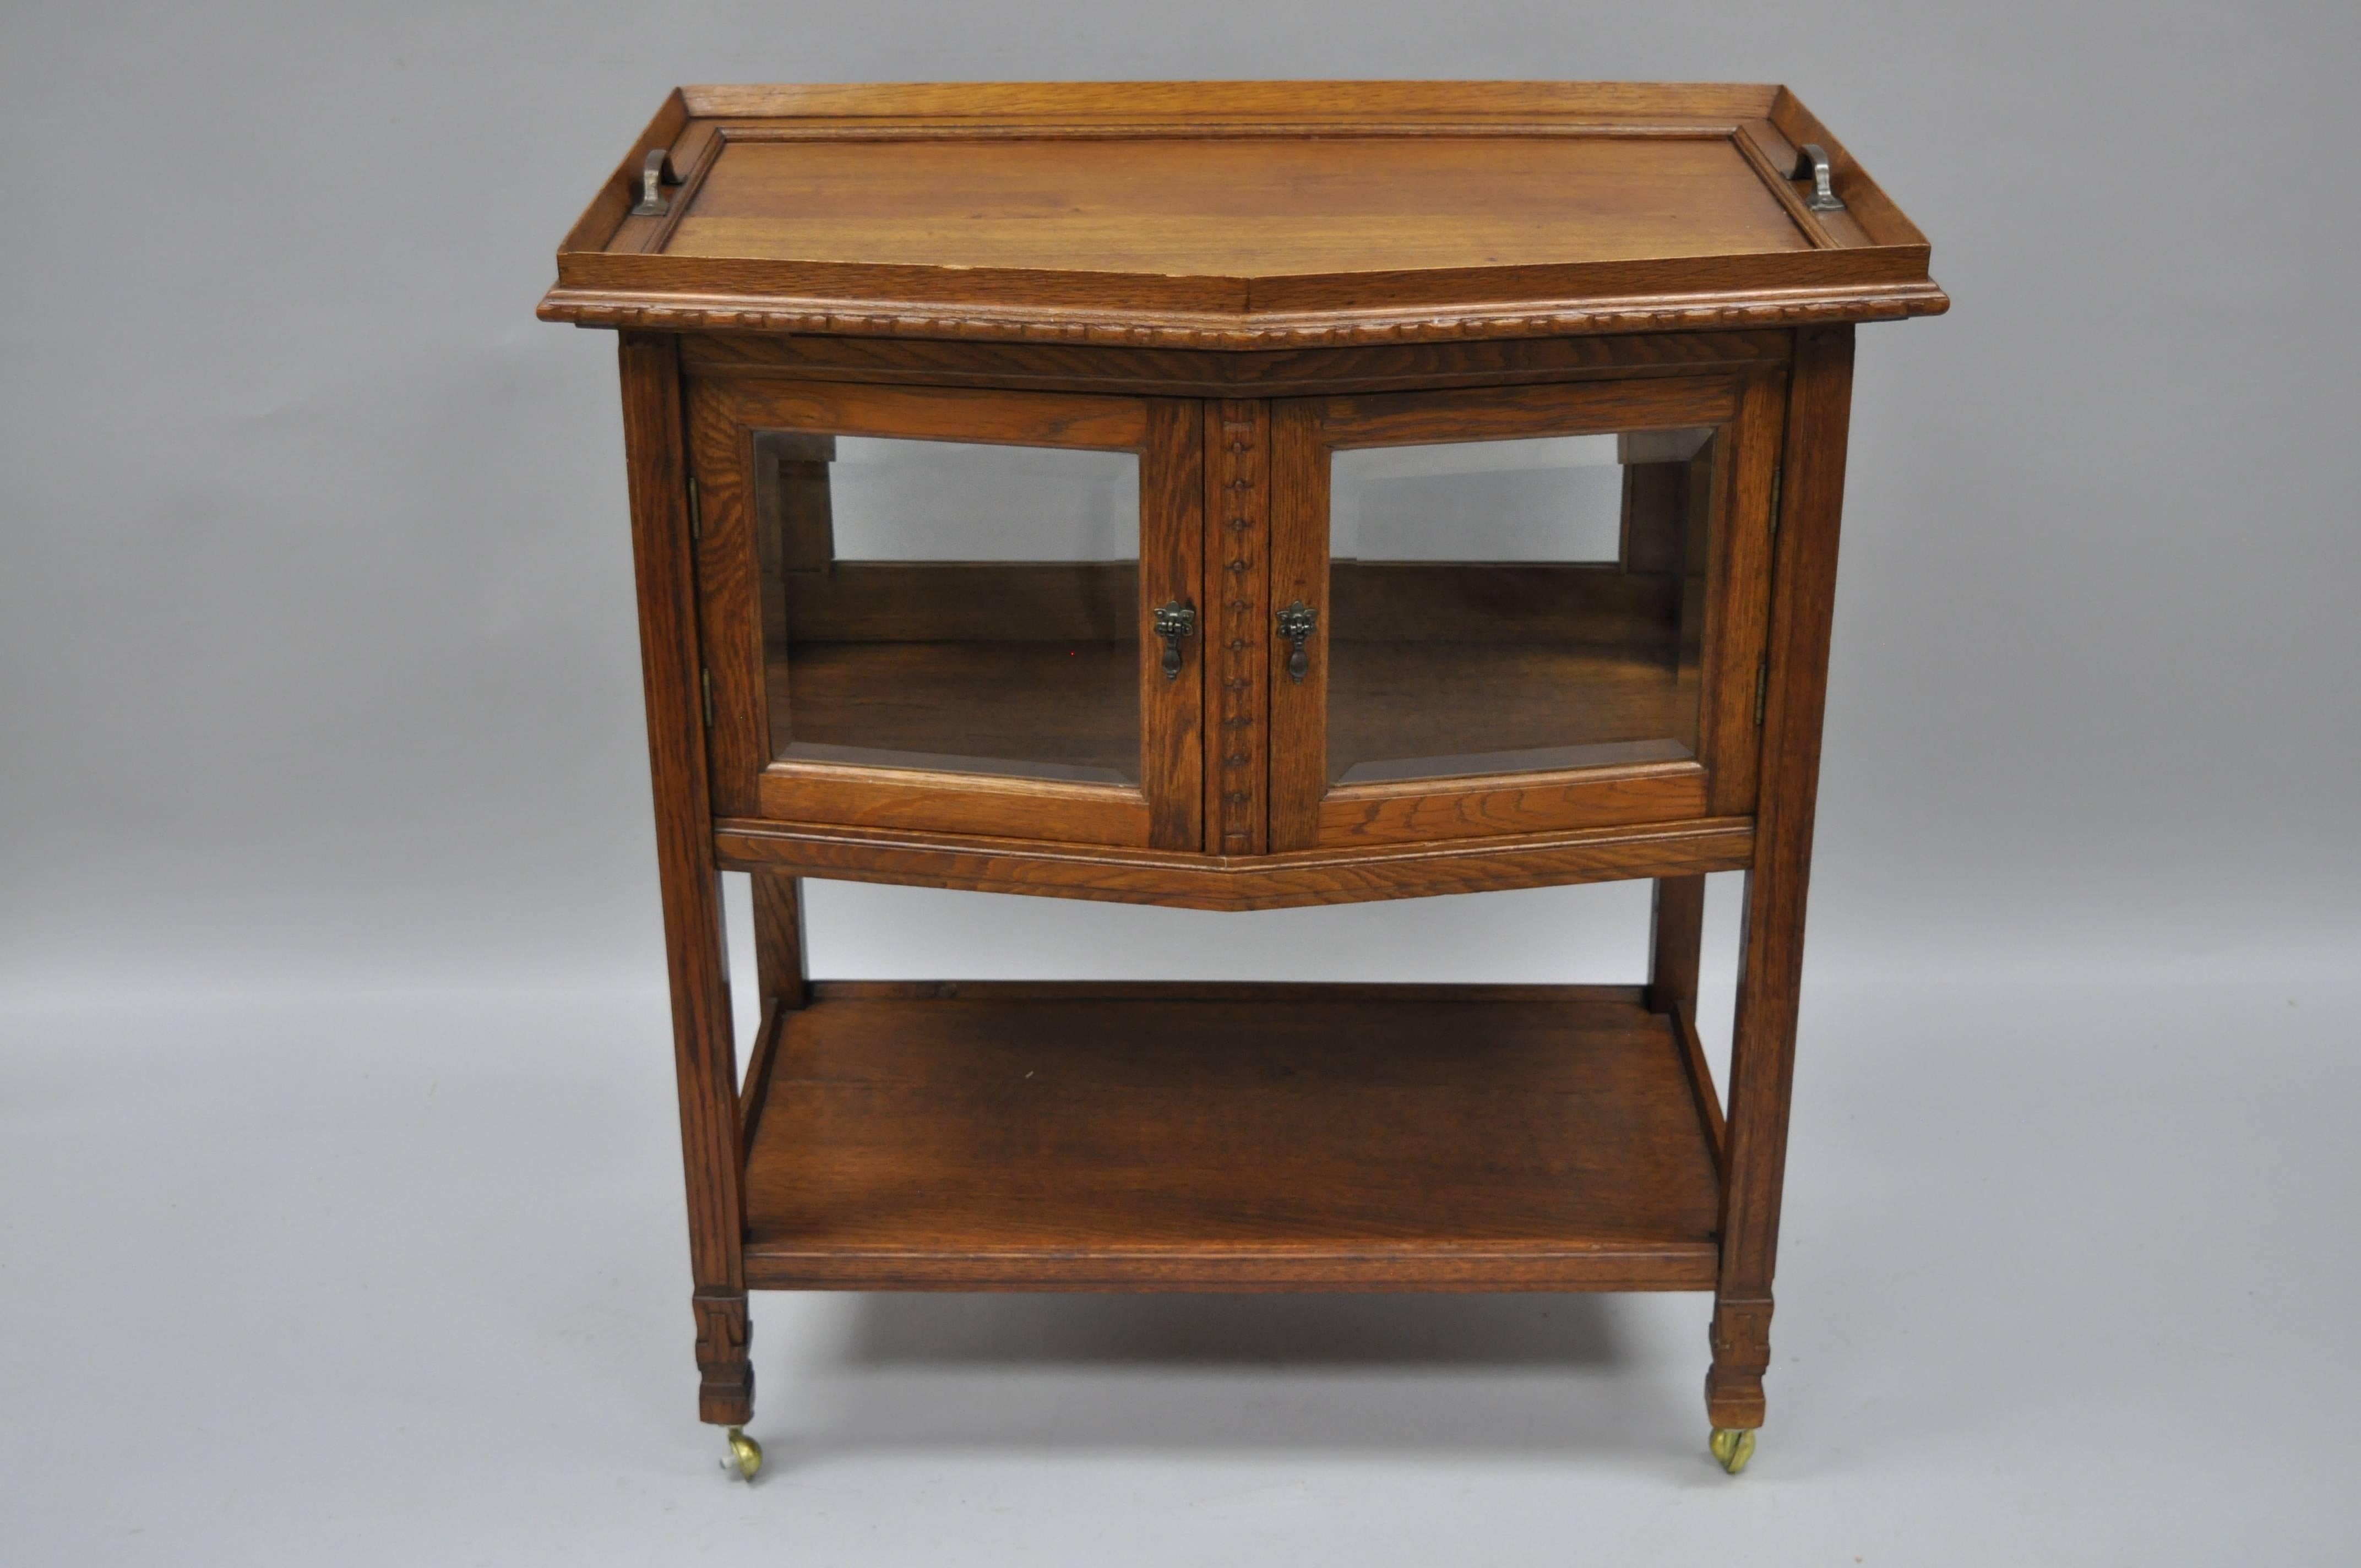 Antique French carved oakwood server bar cart or display cabinet. Item features a removable serving tray top, bevelled glass front and side panels, rear panel glass, rolling casters, lower shelf, beautiful wood grain, and nicely carved details.